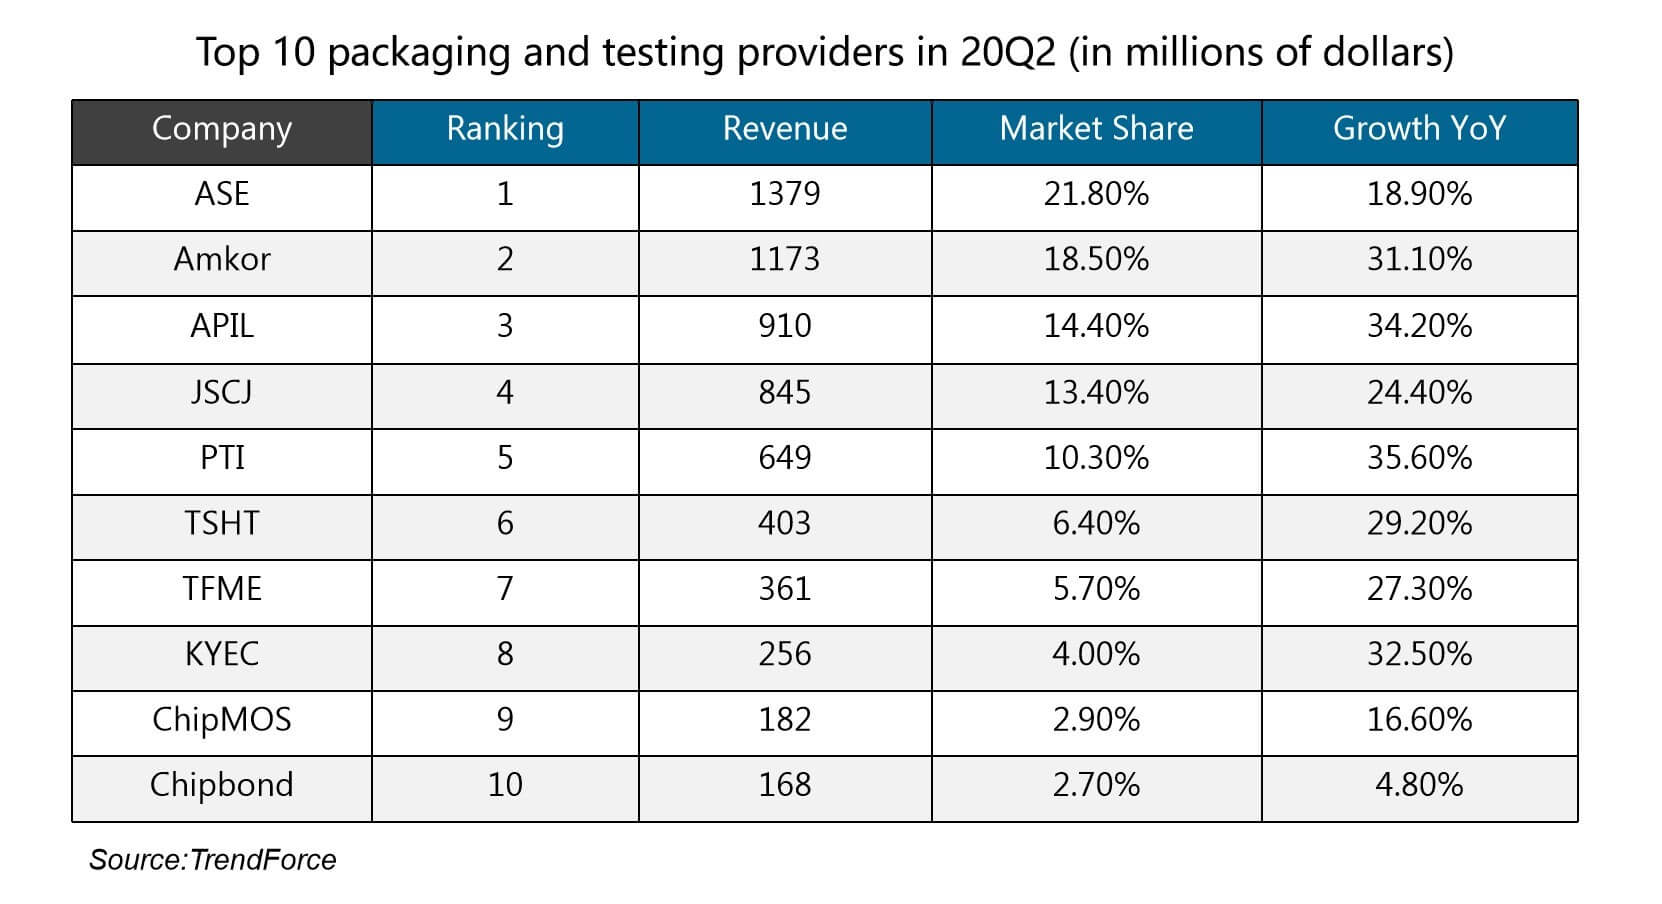 Topology releases IC packaging and testing service provider ranking in 20Q2-SemiMedia